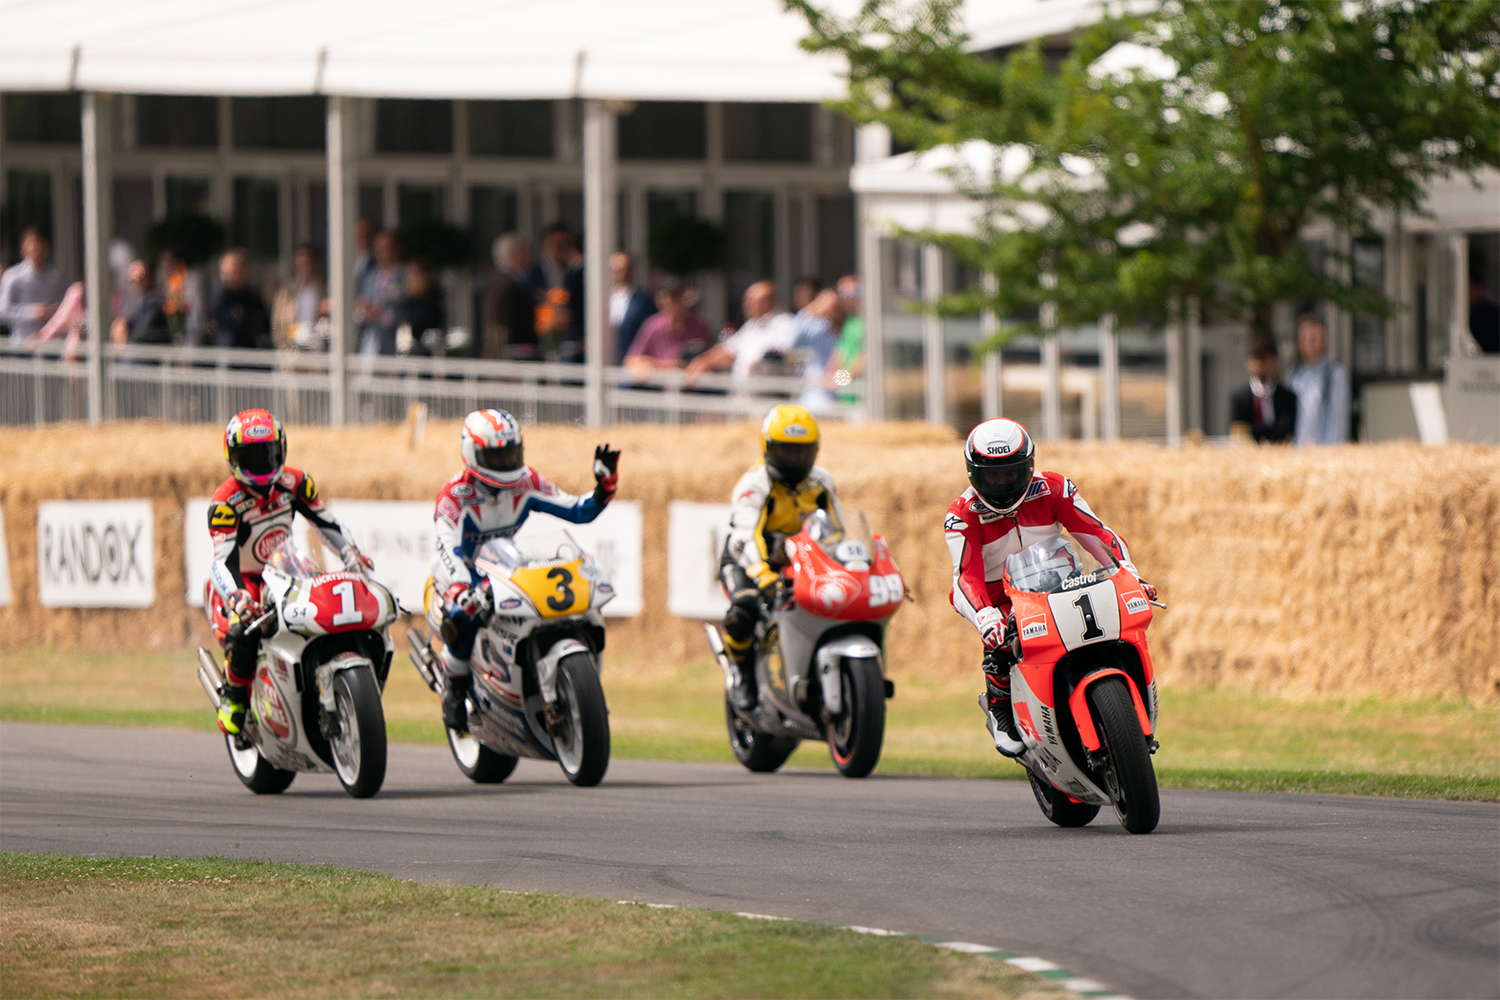 Wayne Rainey, who was paralyzed in 1993 at the height of his motorcycle racing career, rides at the front of a four-person field at the 2022 Goodwood Festival of Speed